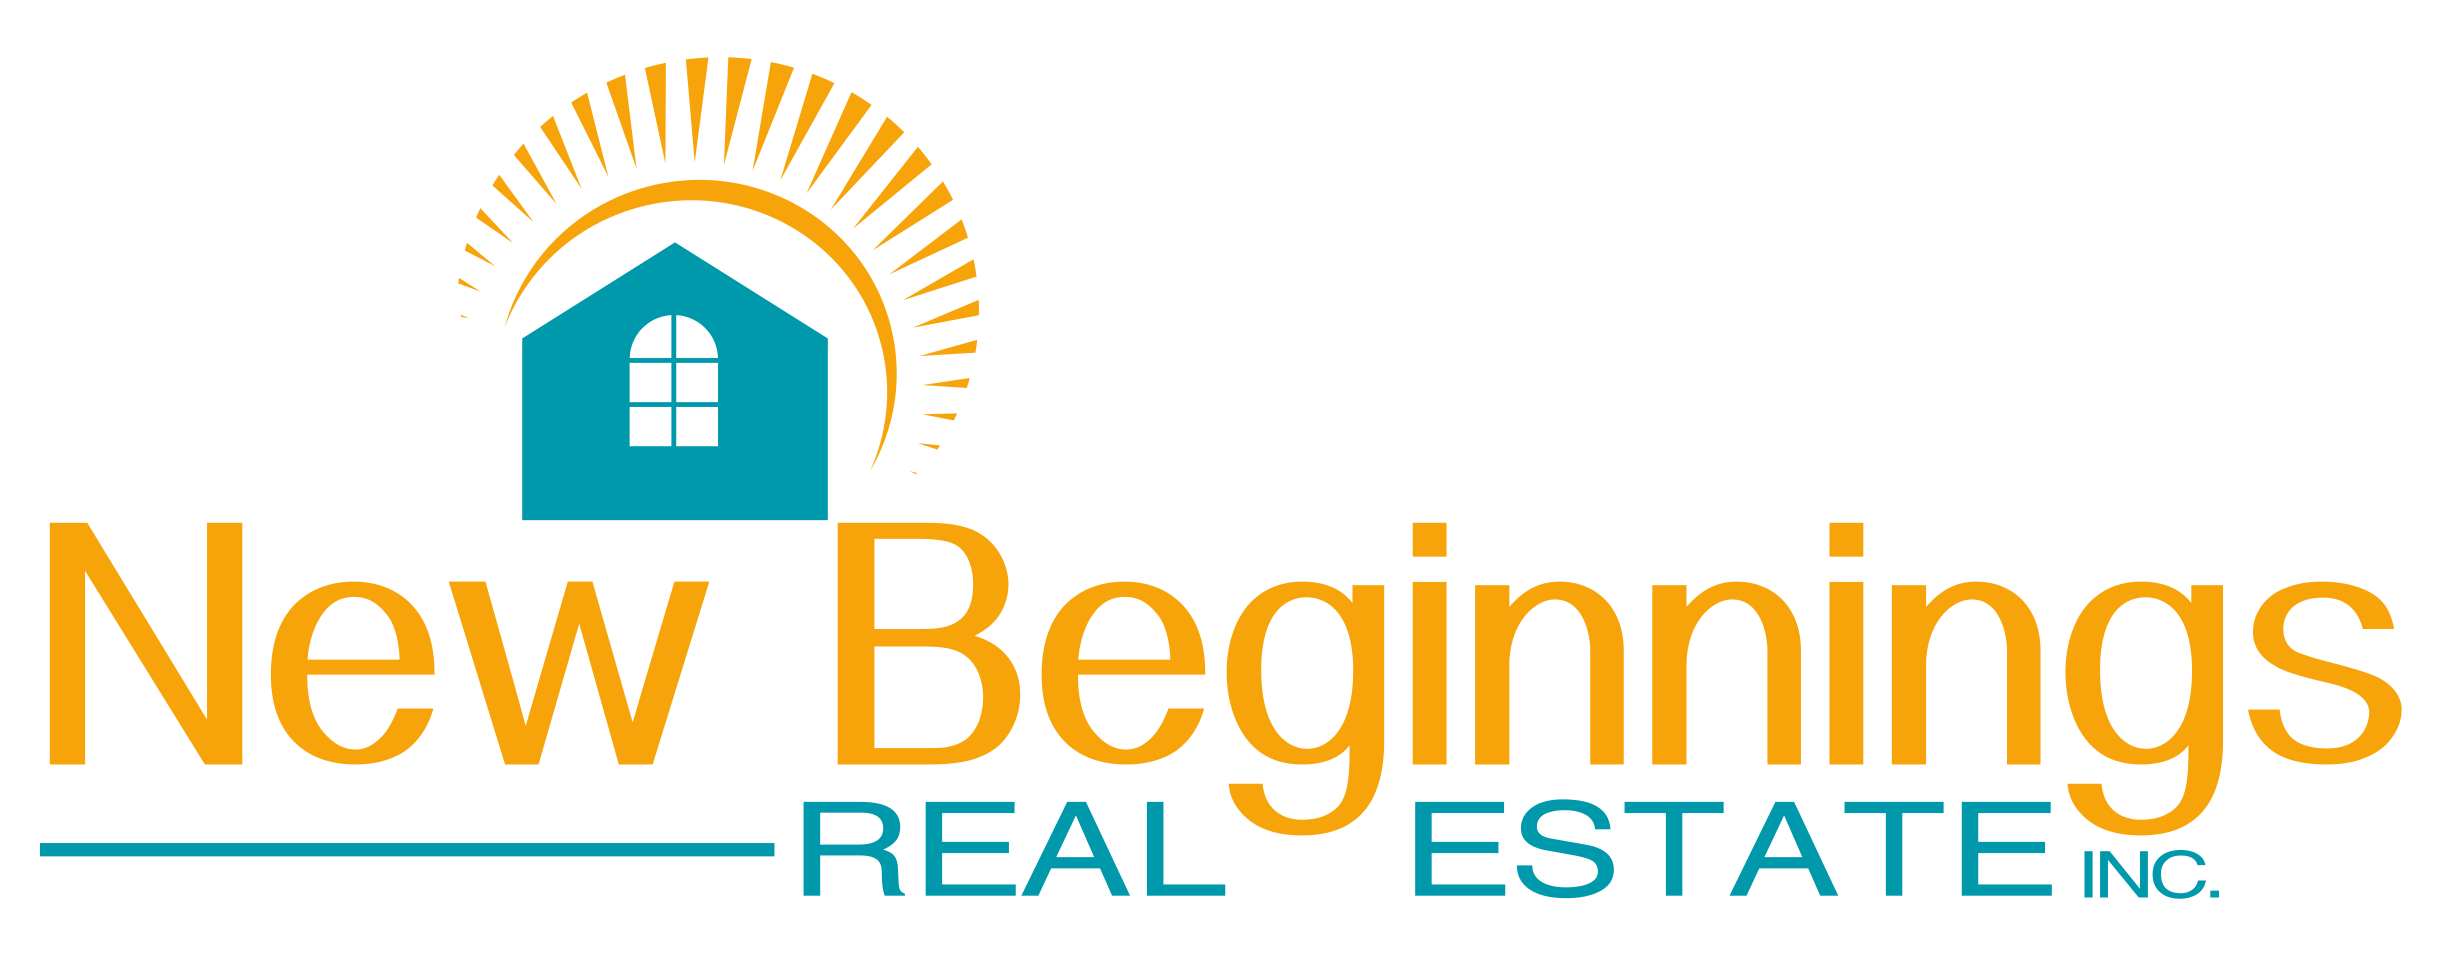 New Beginnings Real Estate of The Triad Inc.